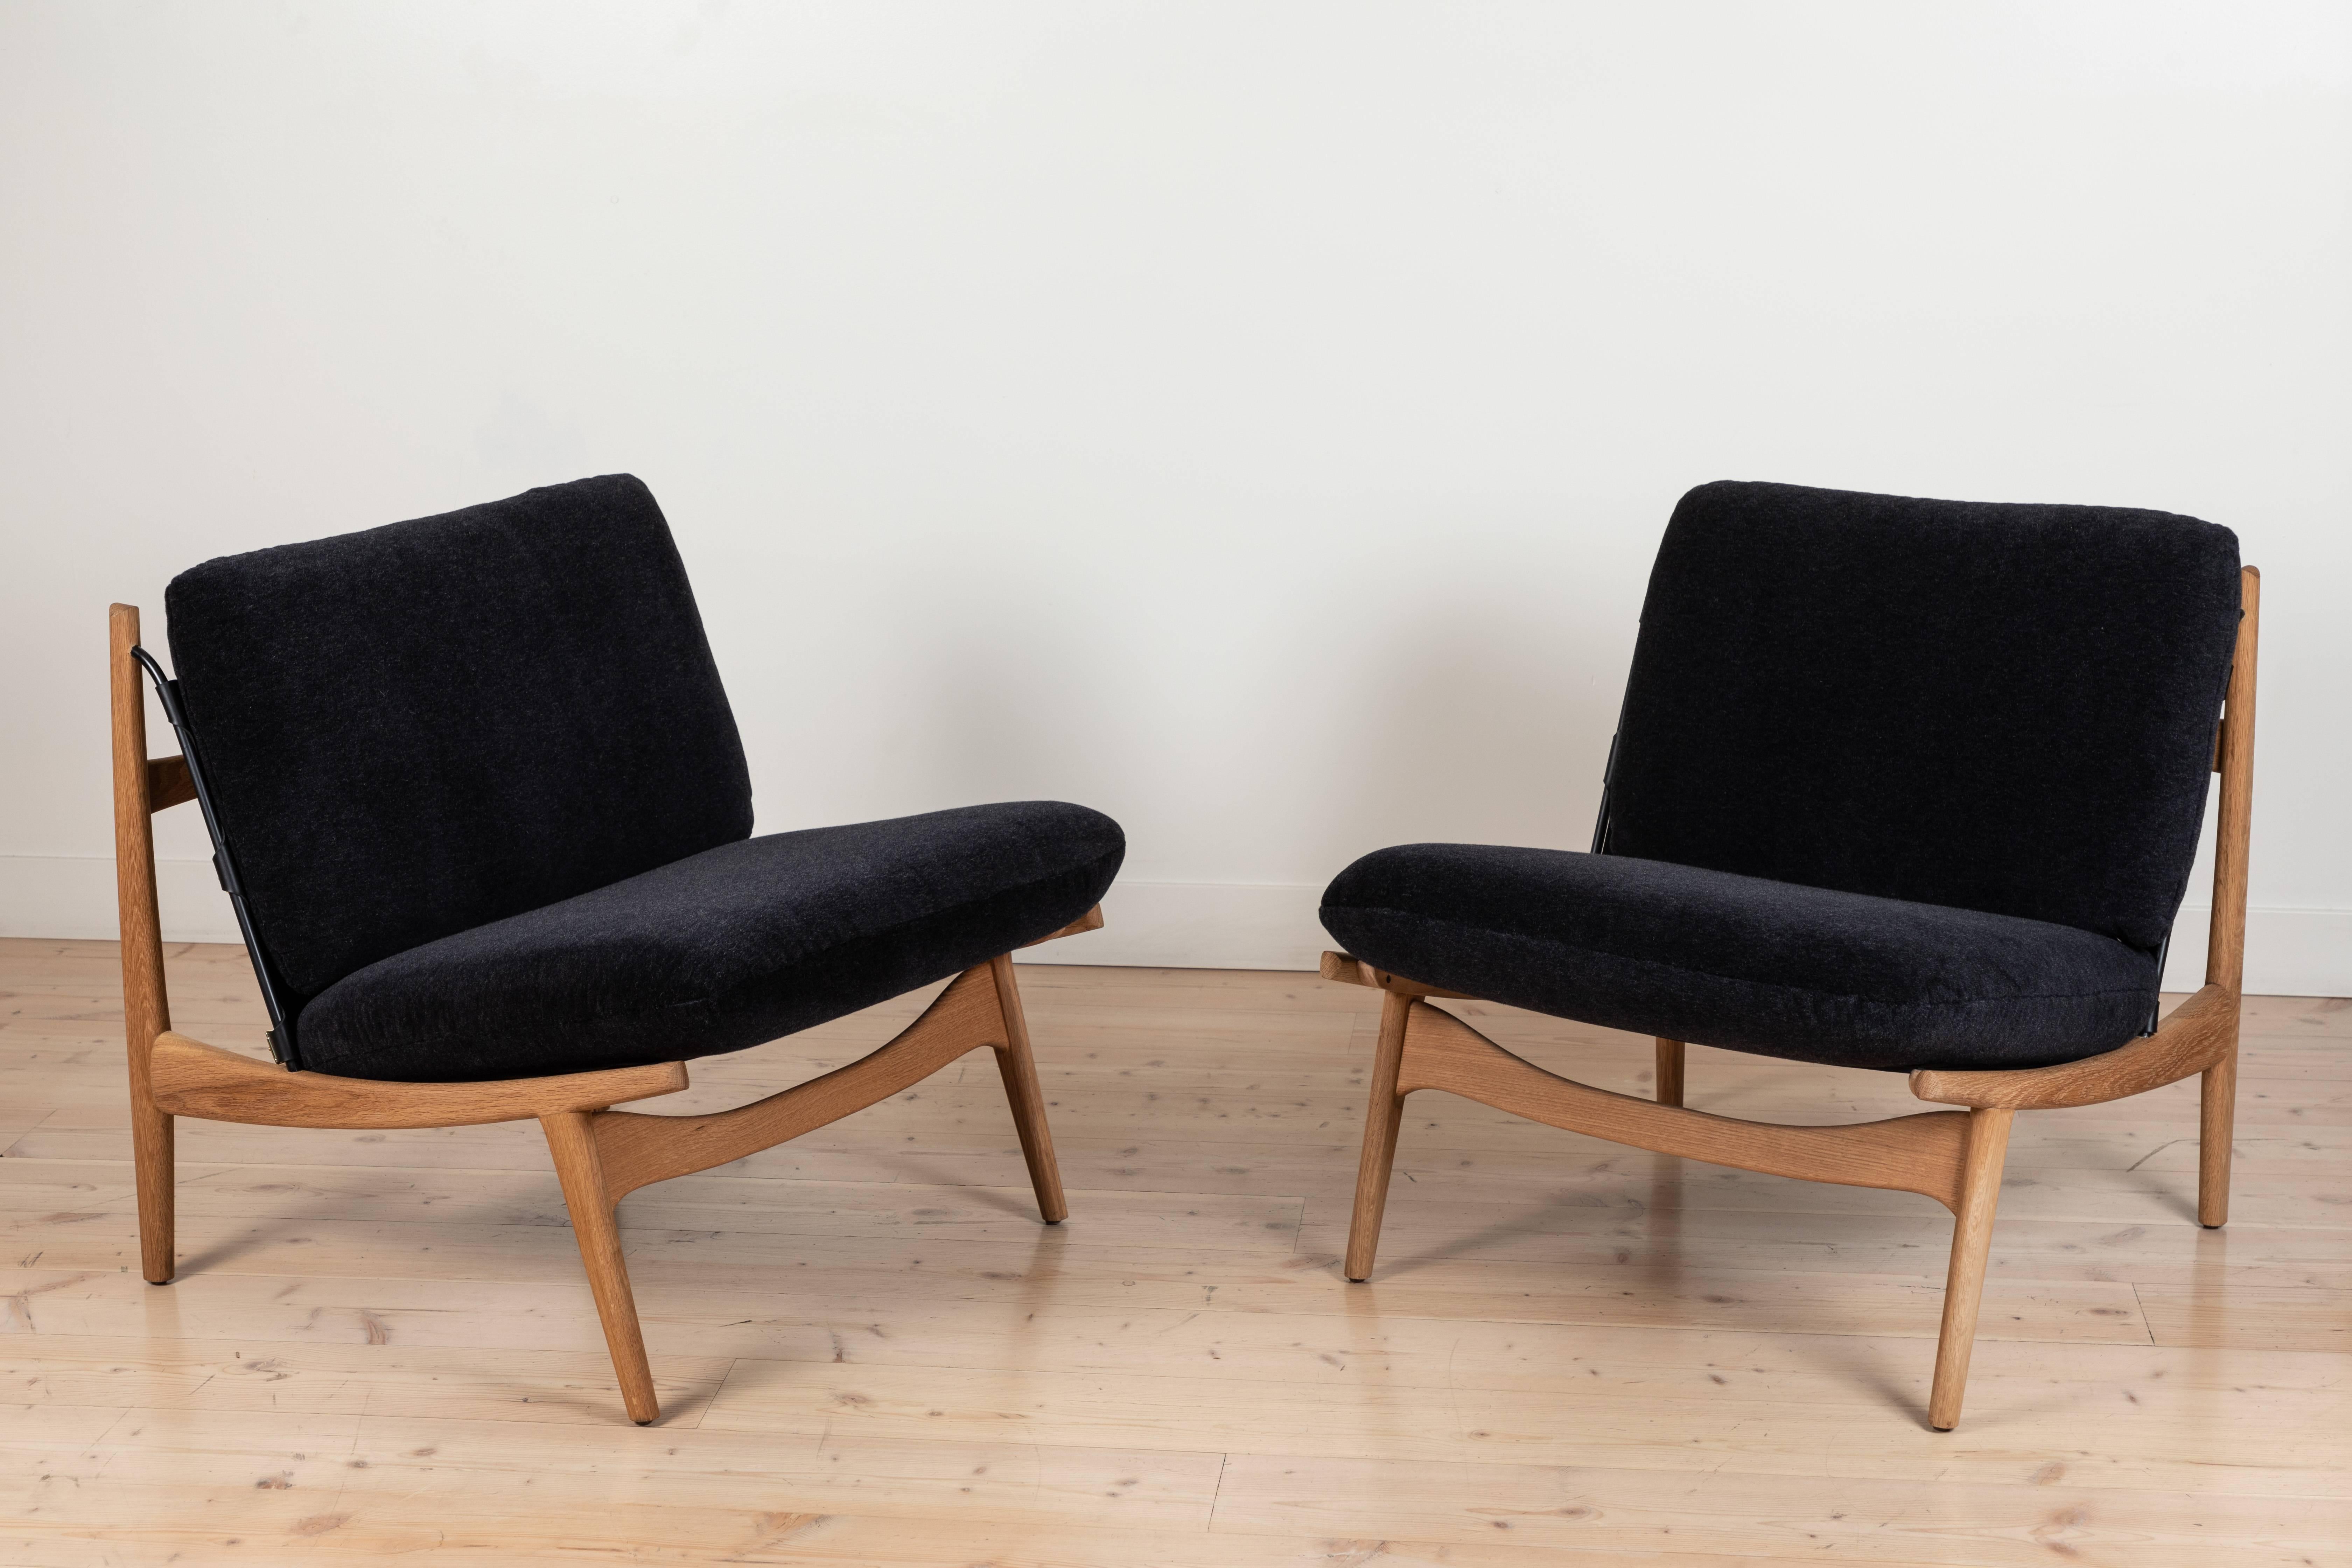 The Maker’s Lounge Chair is a solid walnut or oak frame chair with a leather sling that features brass details on the seat and back. Loose seat and back cushions are included. Shown here in Oiled Oak and Alpaca Mohair.

Available to order in